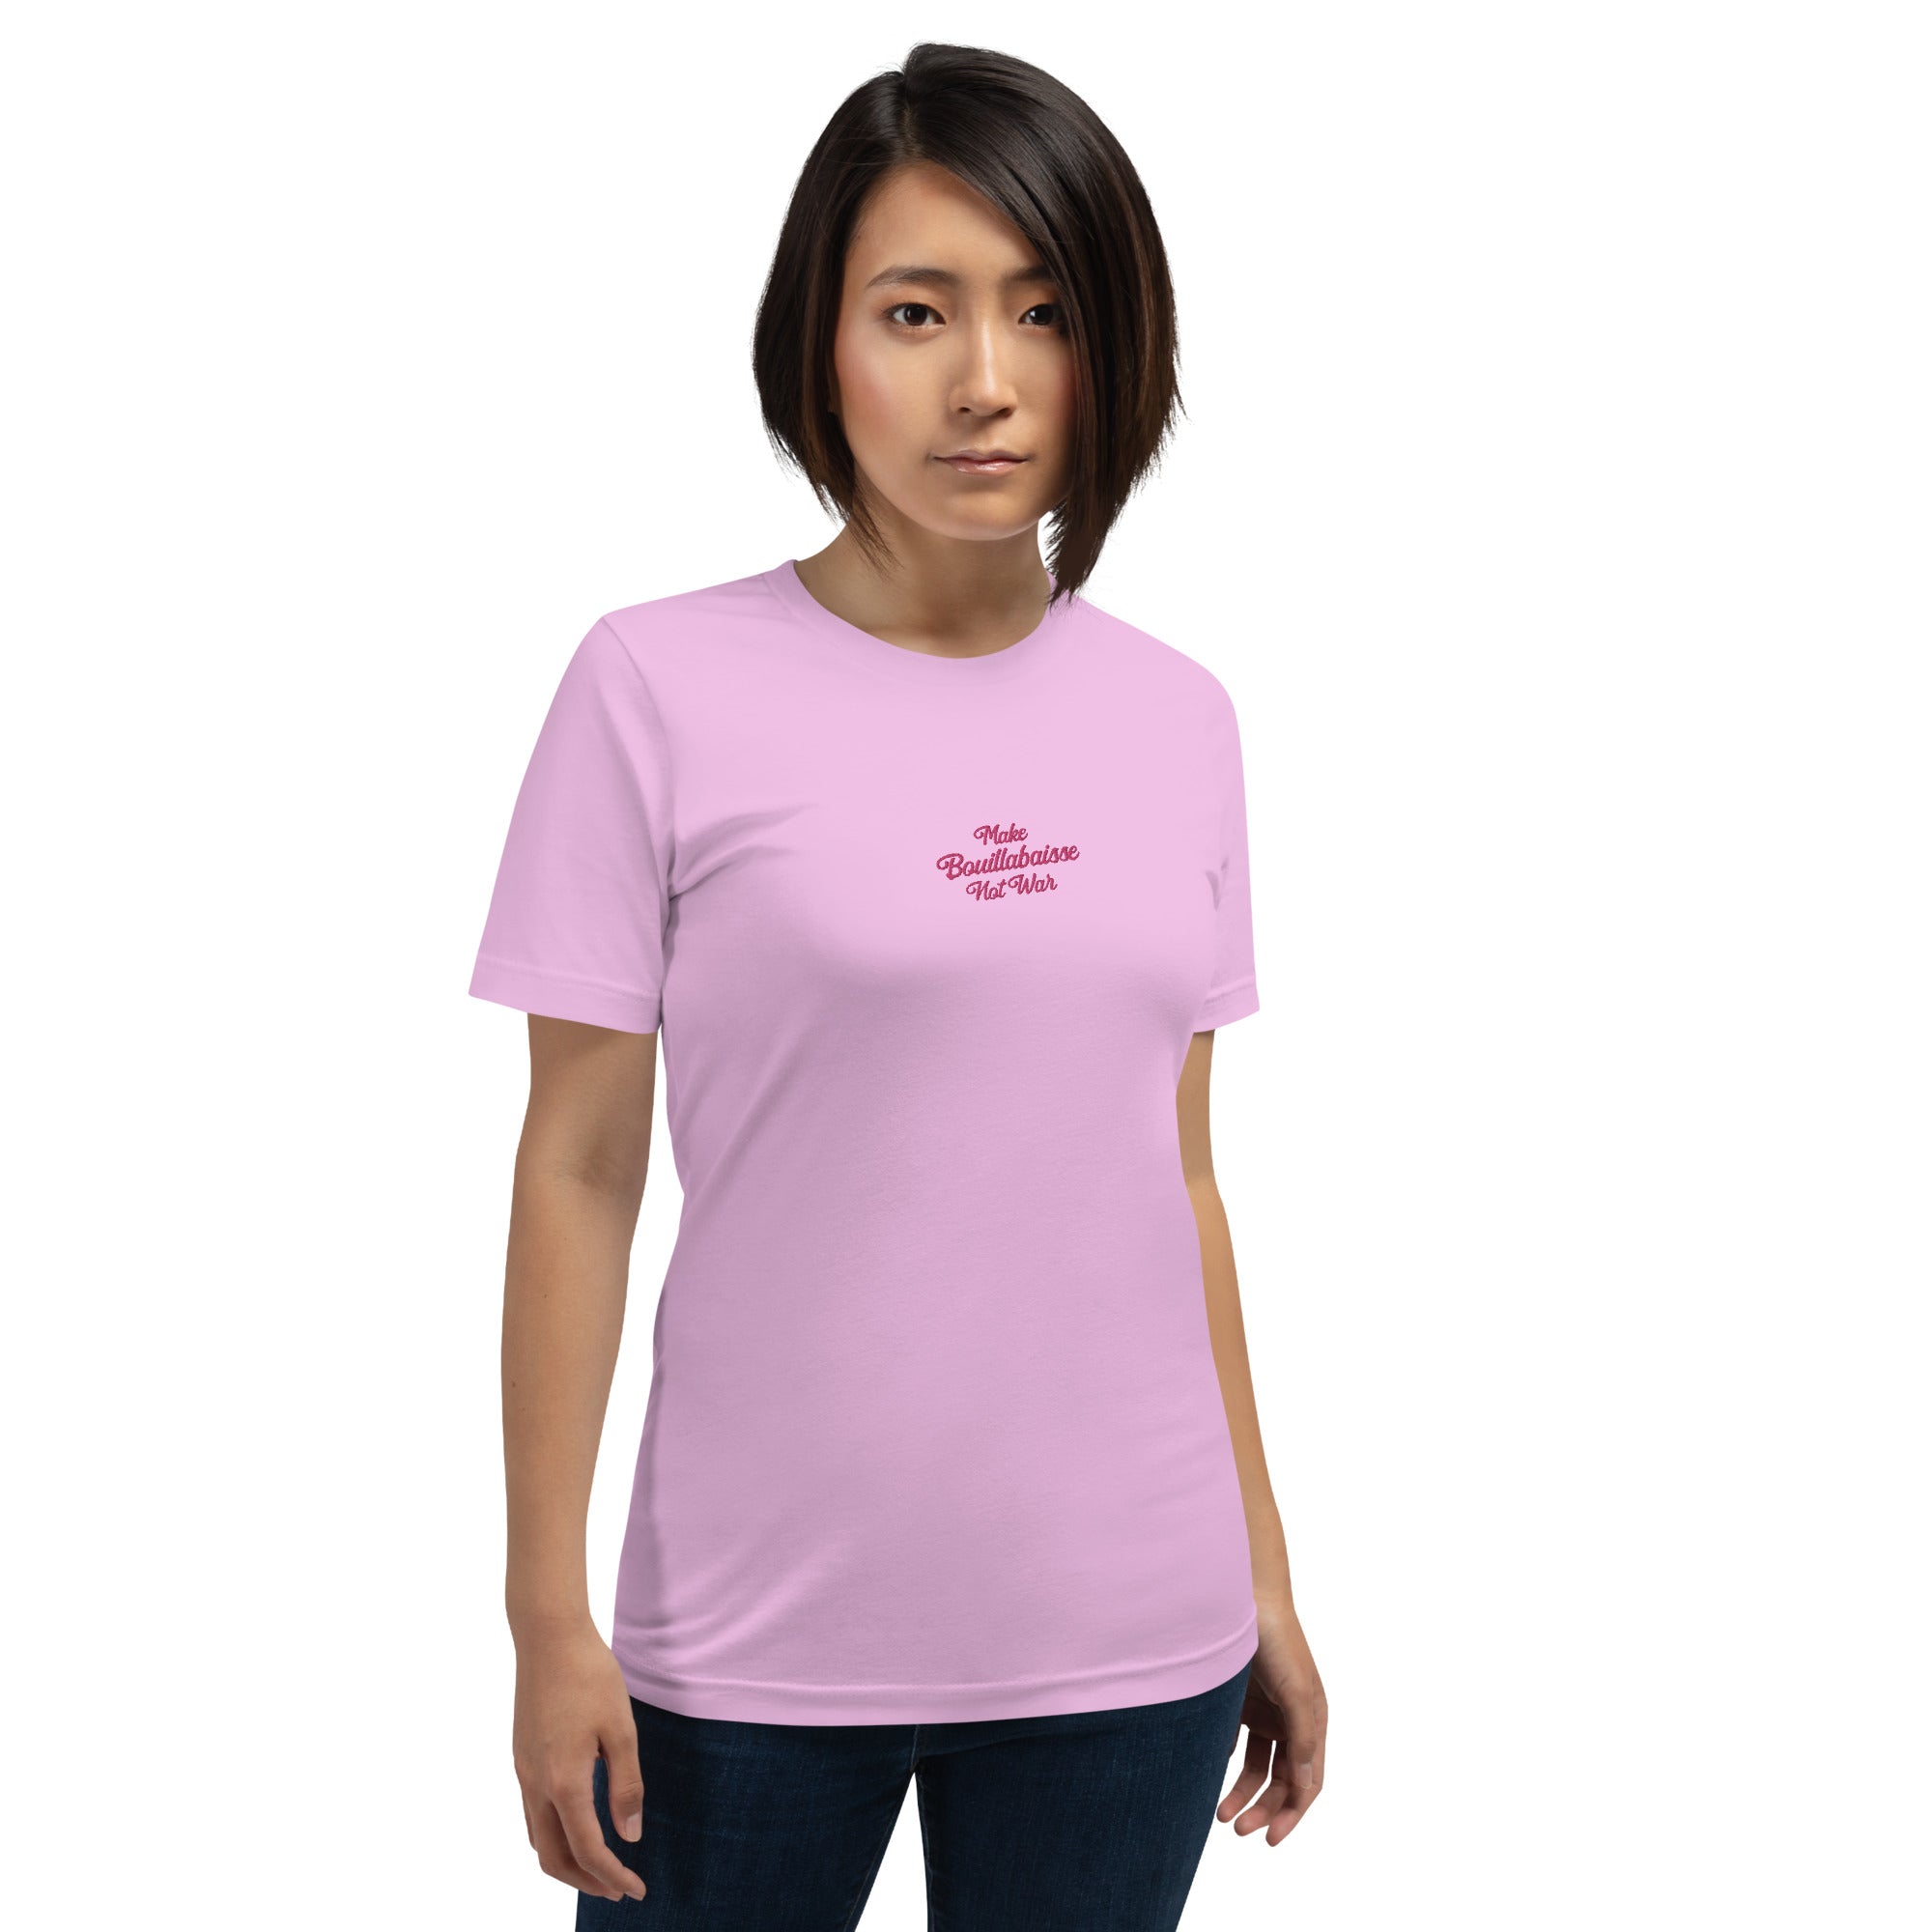 Unisex t-shirt Make Bouillabaisse Not War Text Only flamingo embroidered pattern on light colors